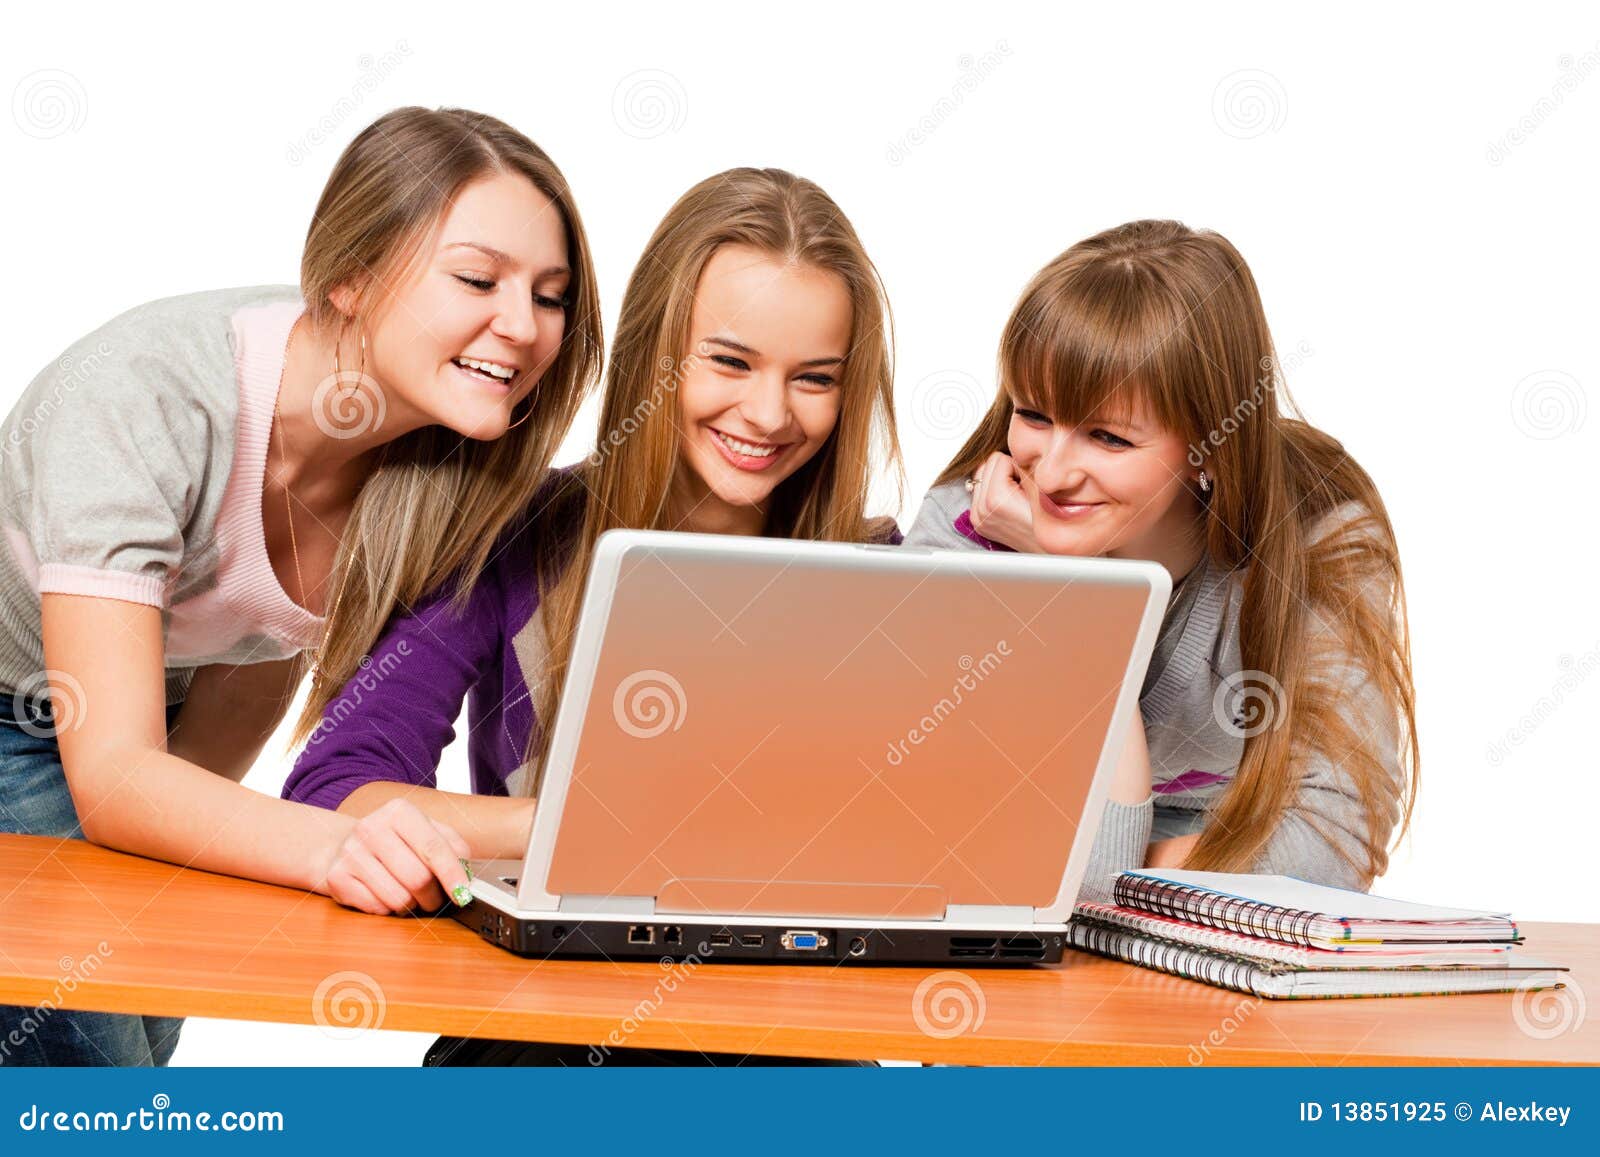 3 056 Girls Surfing Photos Free Royalty Free Stock Photos From Dreamstime